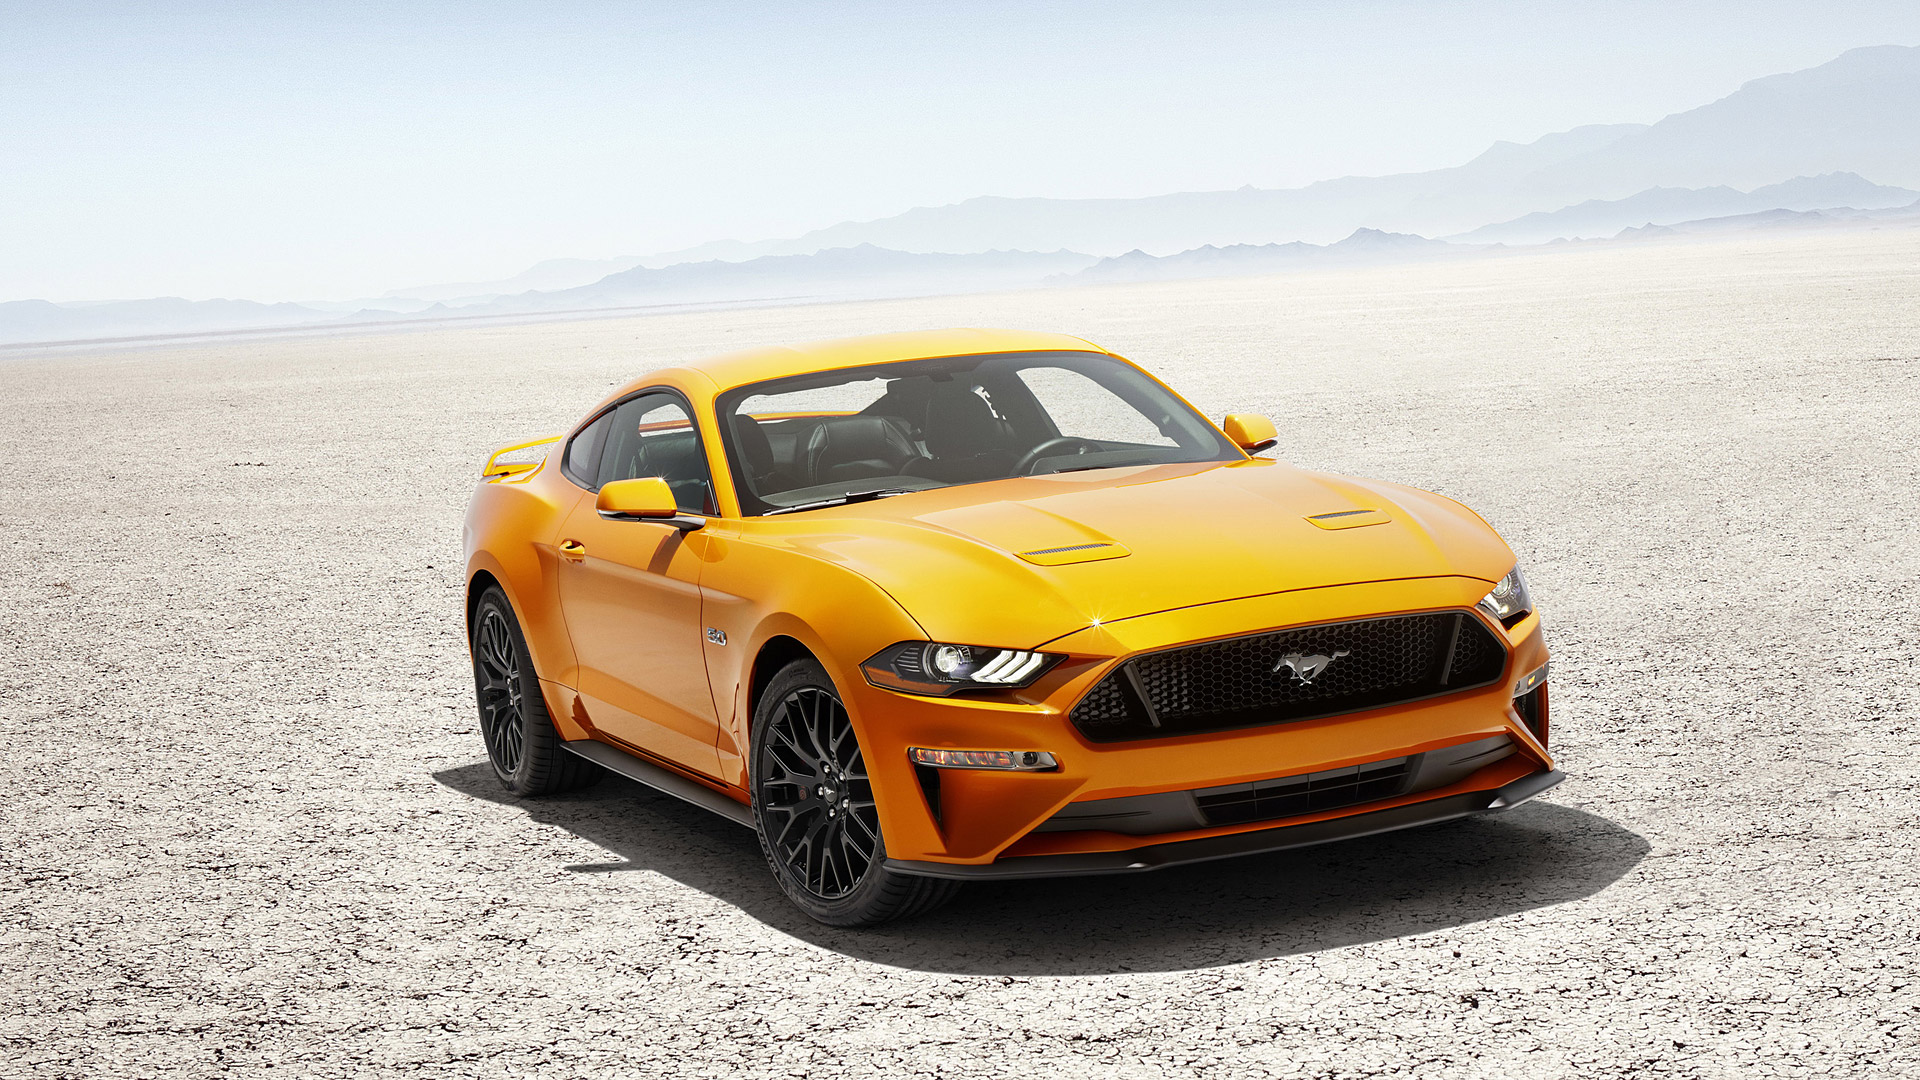 Ford Mustang S550 Wallpapers Free - Ford Mustang 2018 Orange , HD Wallpaper & Backgrounds